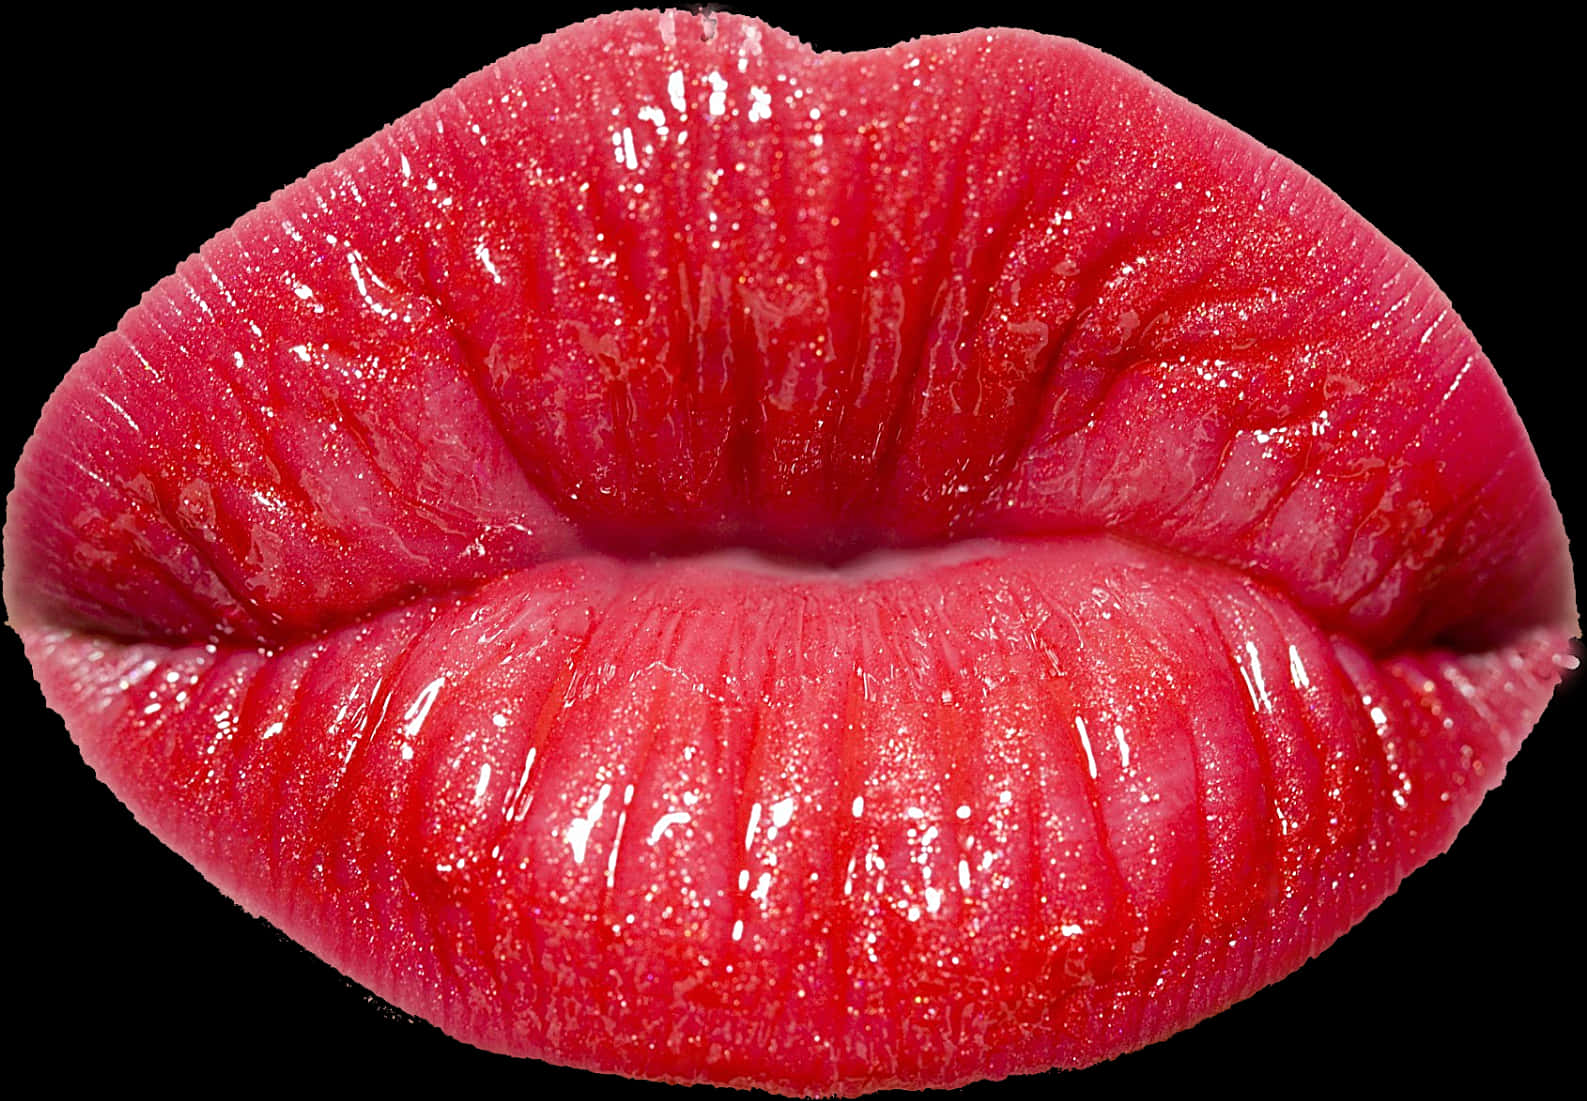 A Close Up Of A Lips